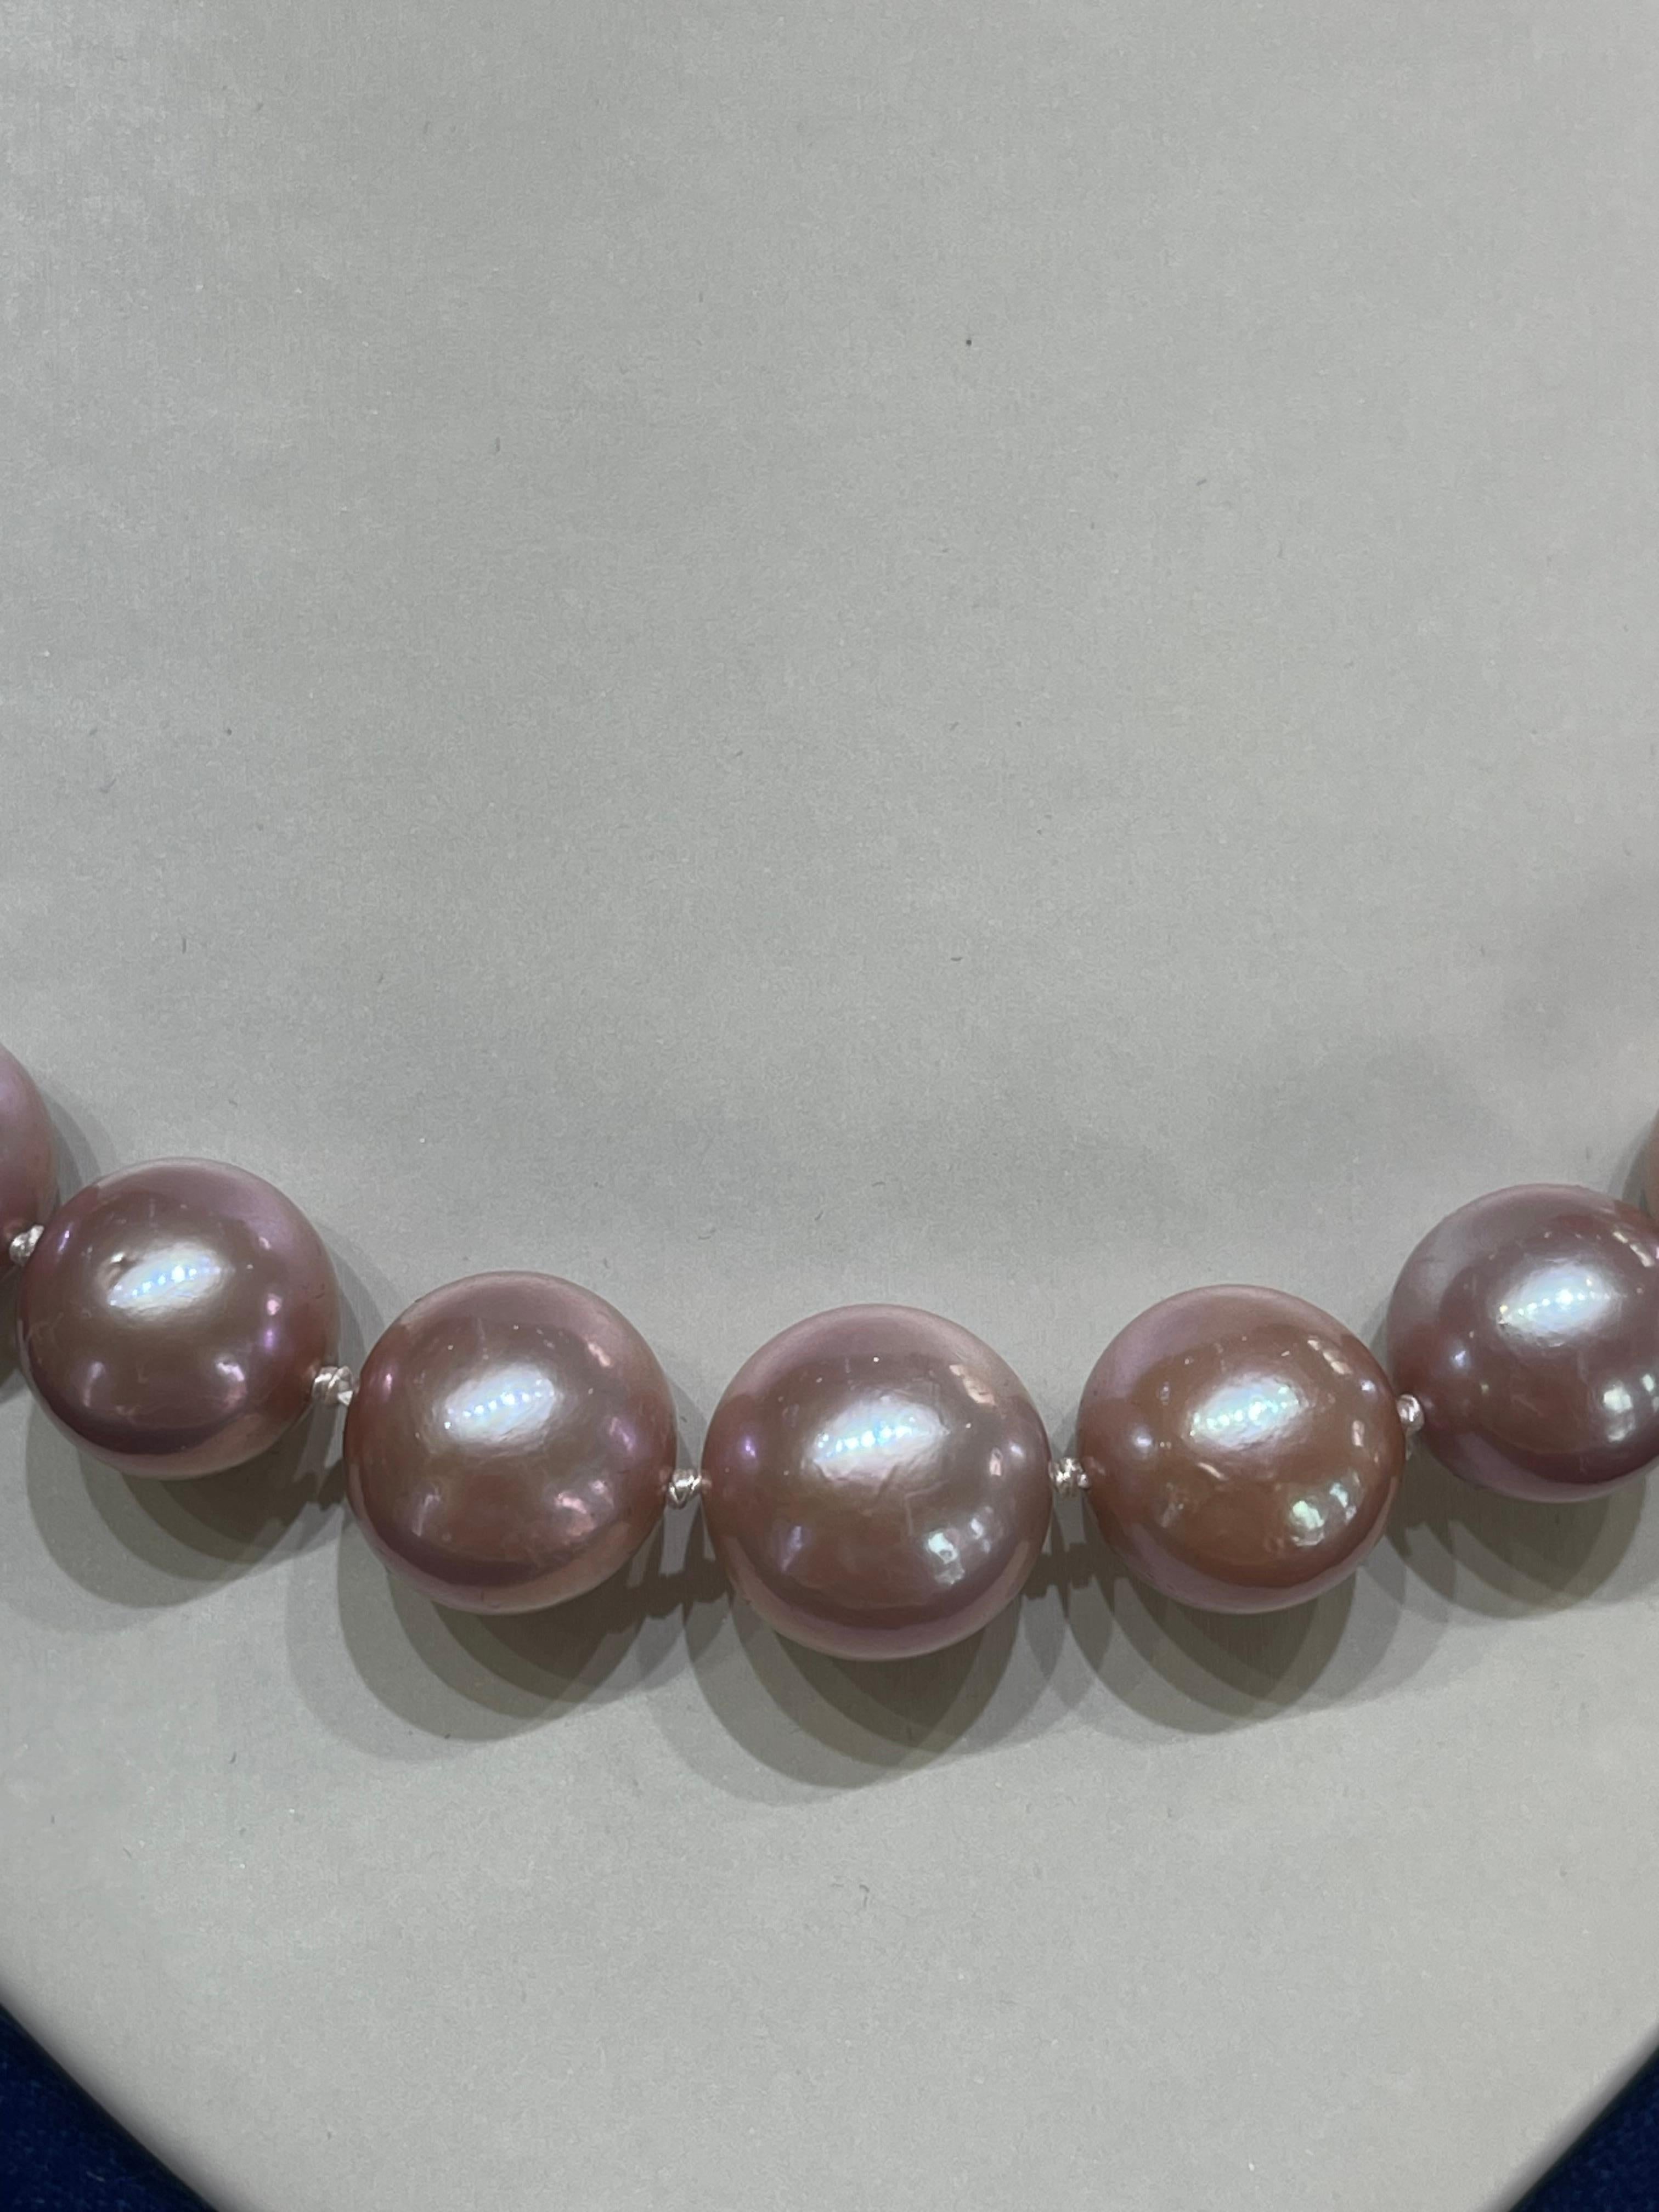 14k yellow gold freshwater Edison natural pink pearl necklace. The length of this necklace is 17 inches, the width is 13-15 mm, has a pearl clasp to open and close, and it has a total weight of 109.1 grams.